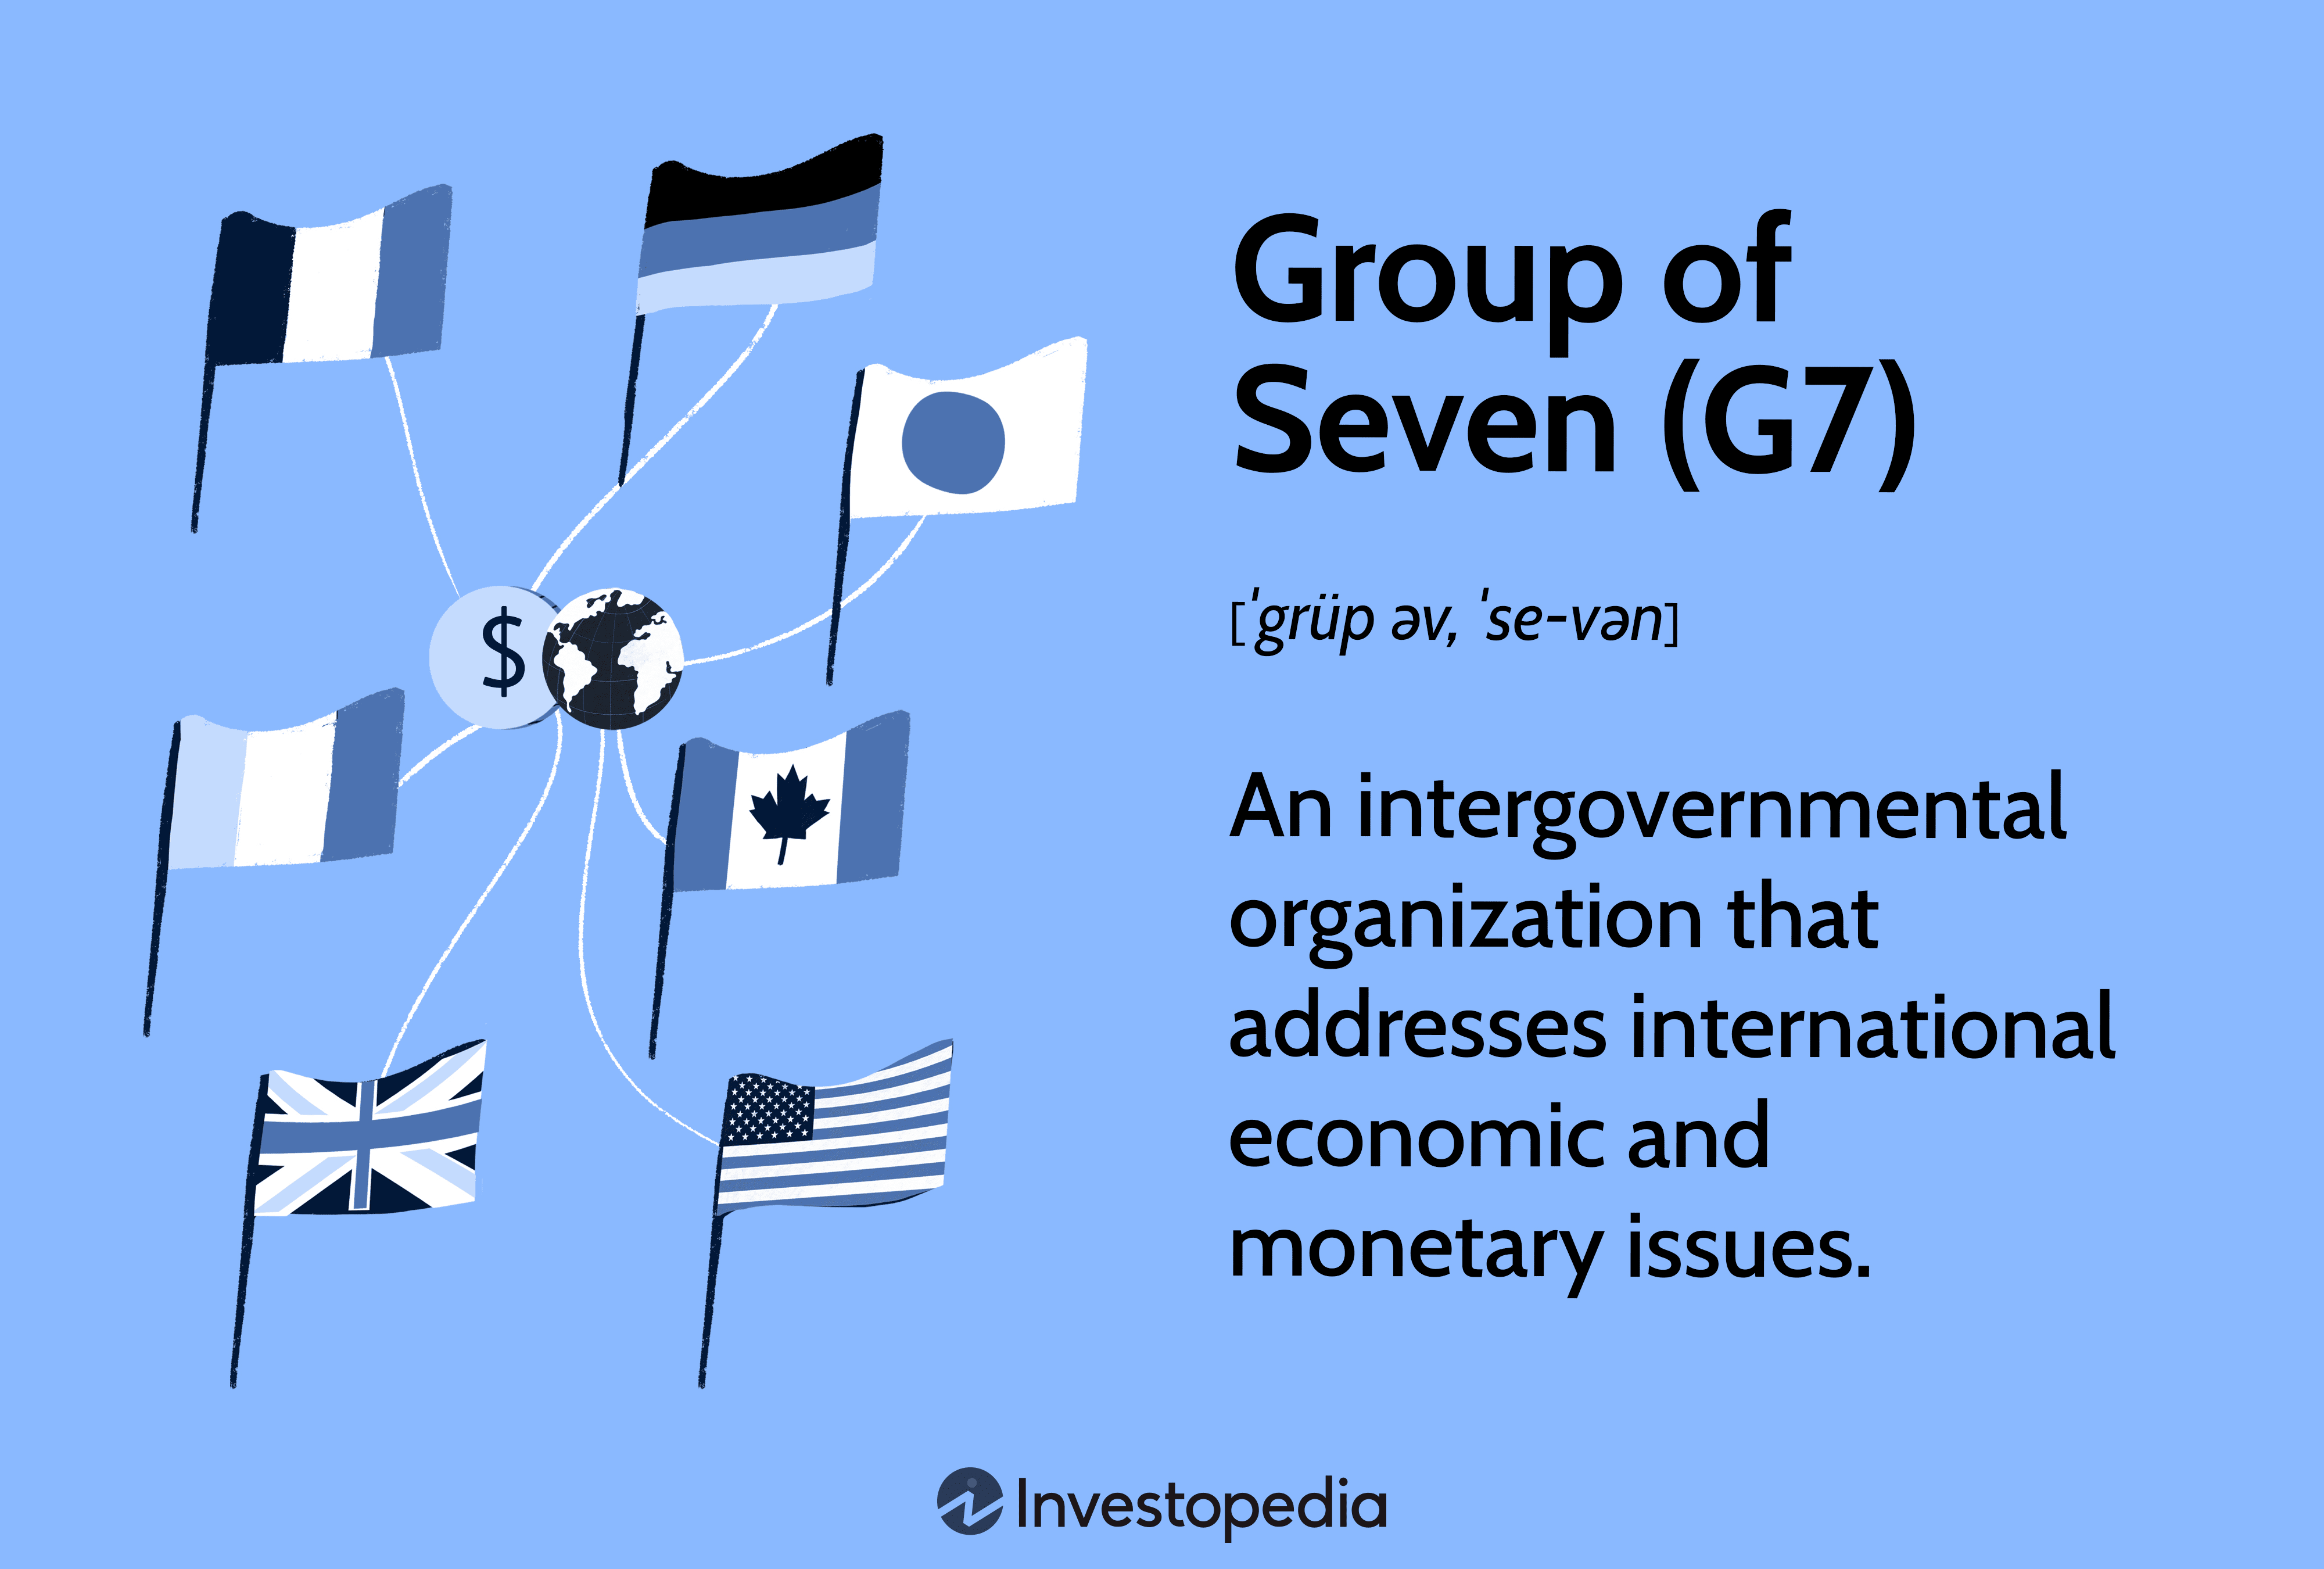 Group of Seven (G7): An intergovernmental organization made up of the world's largest developed economies that meets periodically to address international economic and monetary issues.